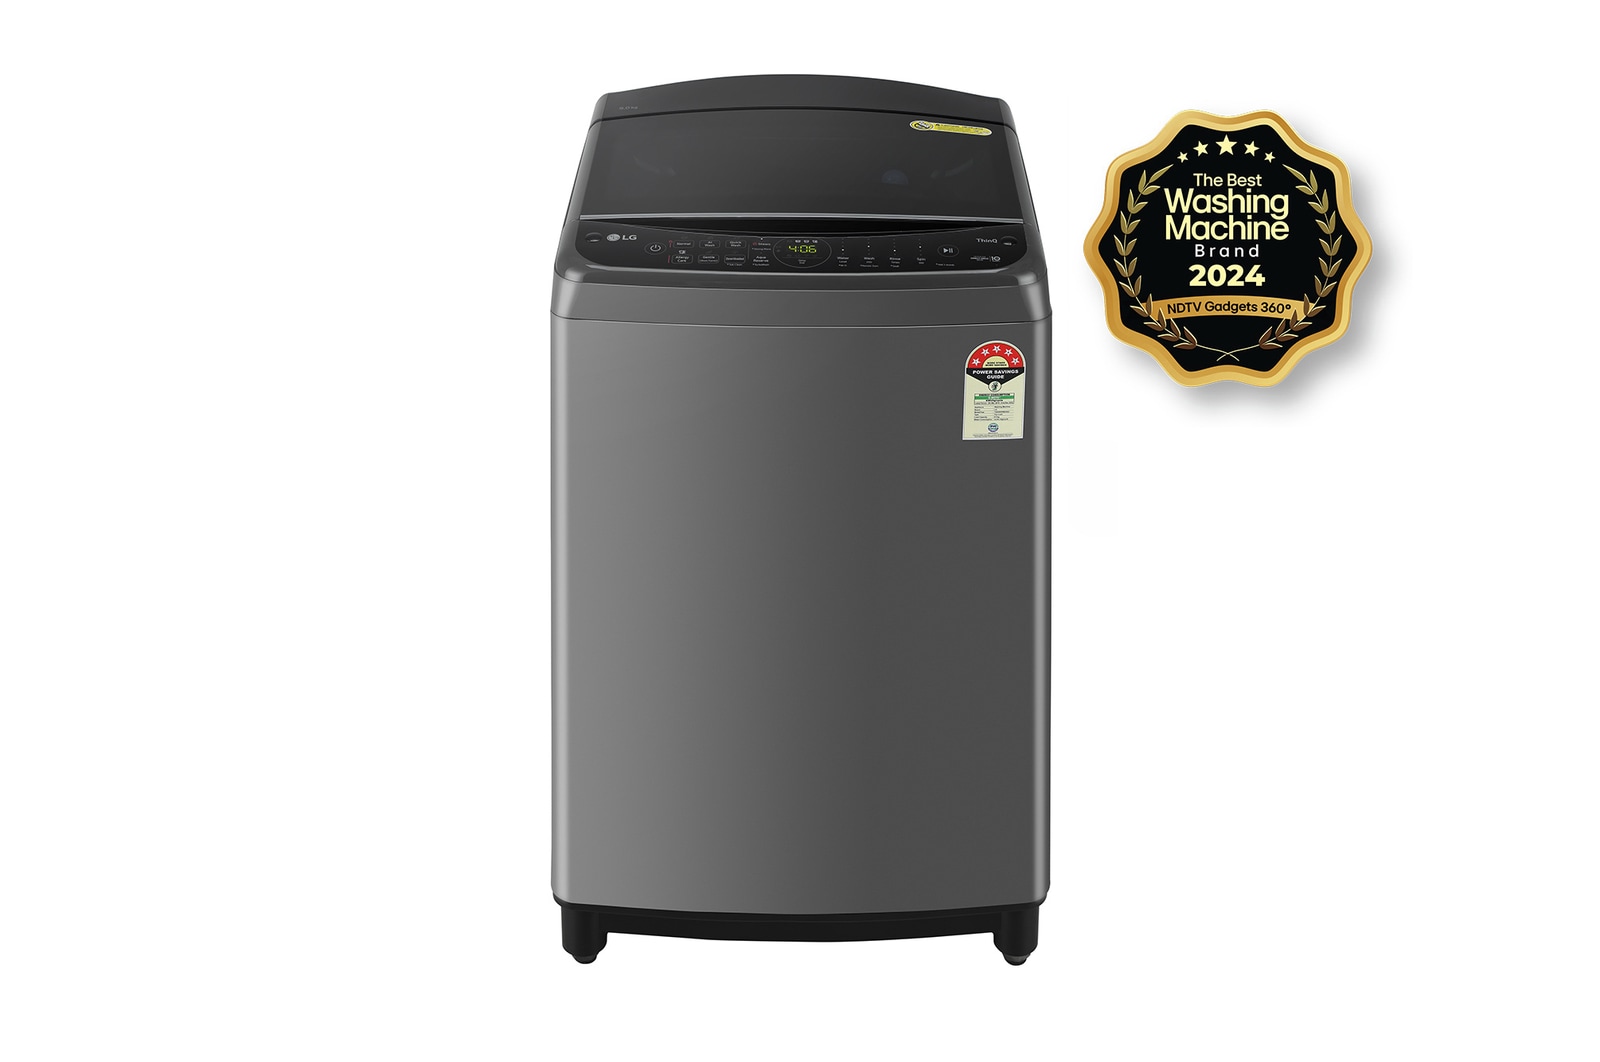 LG 9Kg Top Load Washing Machine, AI Direct Drive™, In-built Heater, Middle Black, THD09SWM